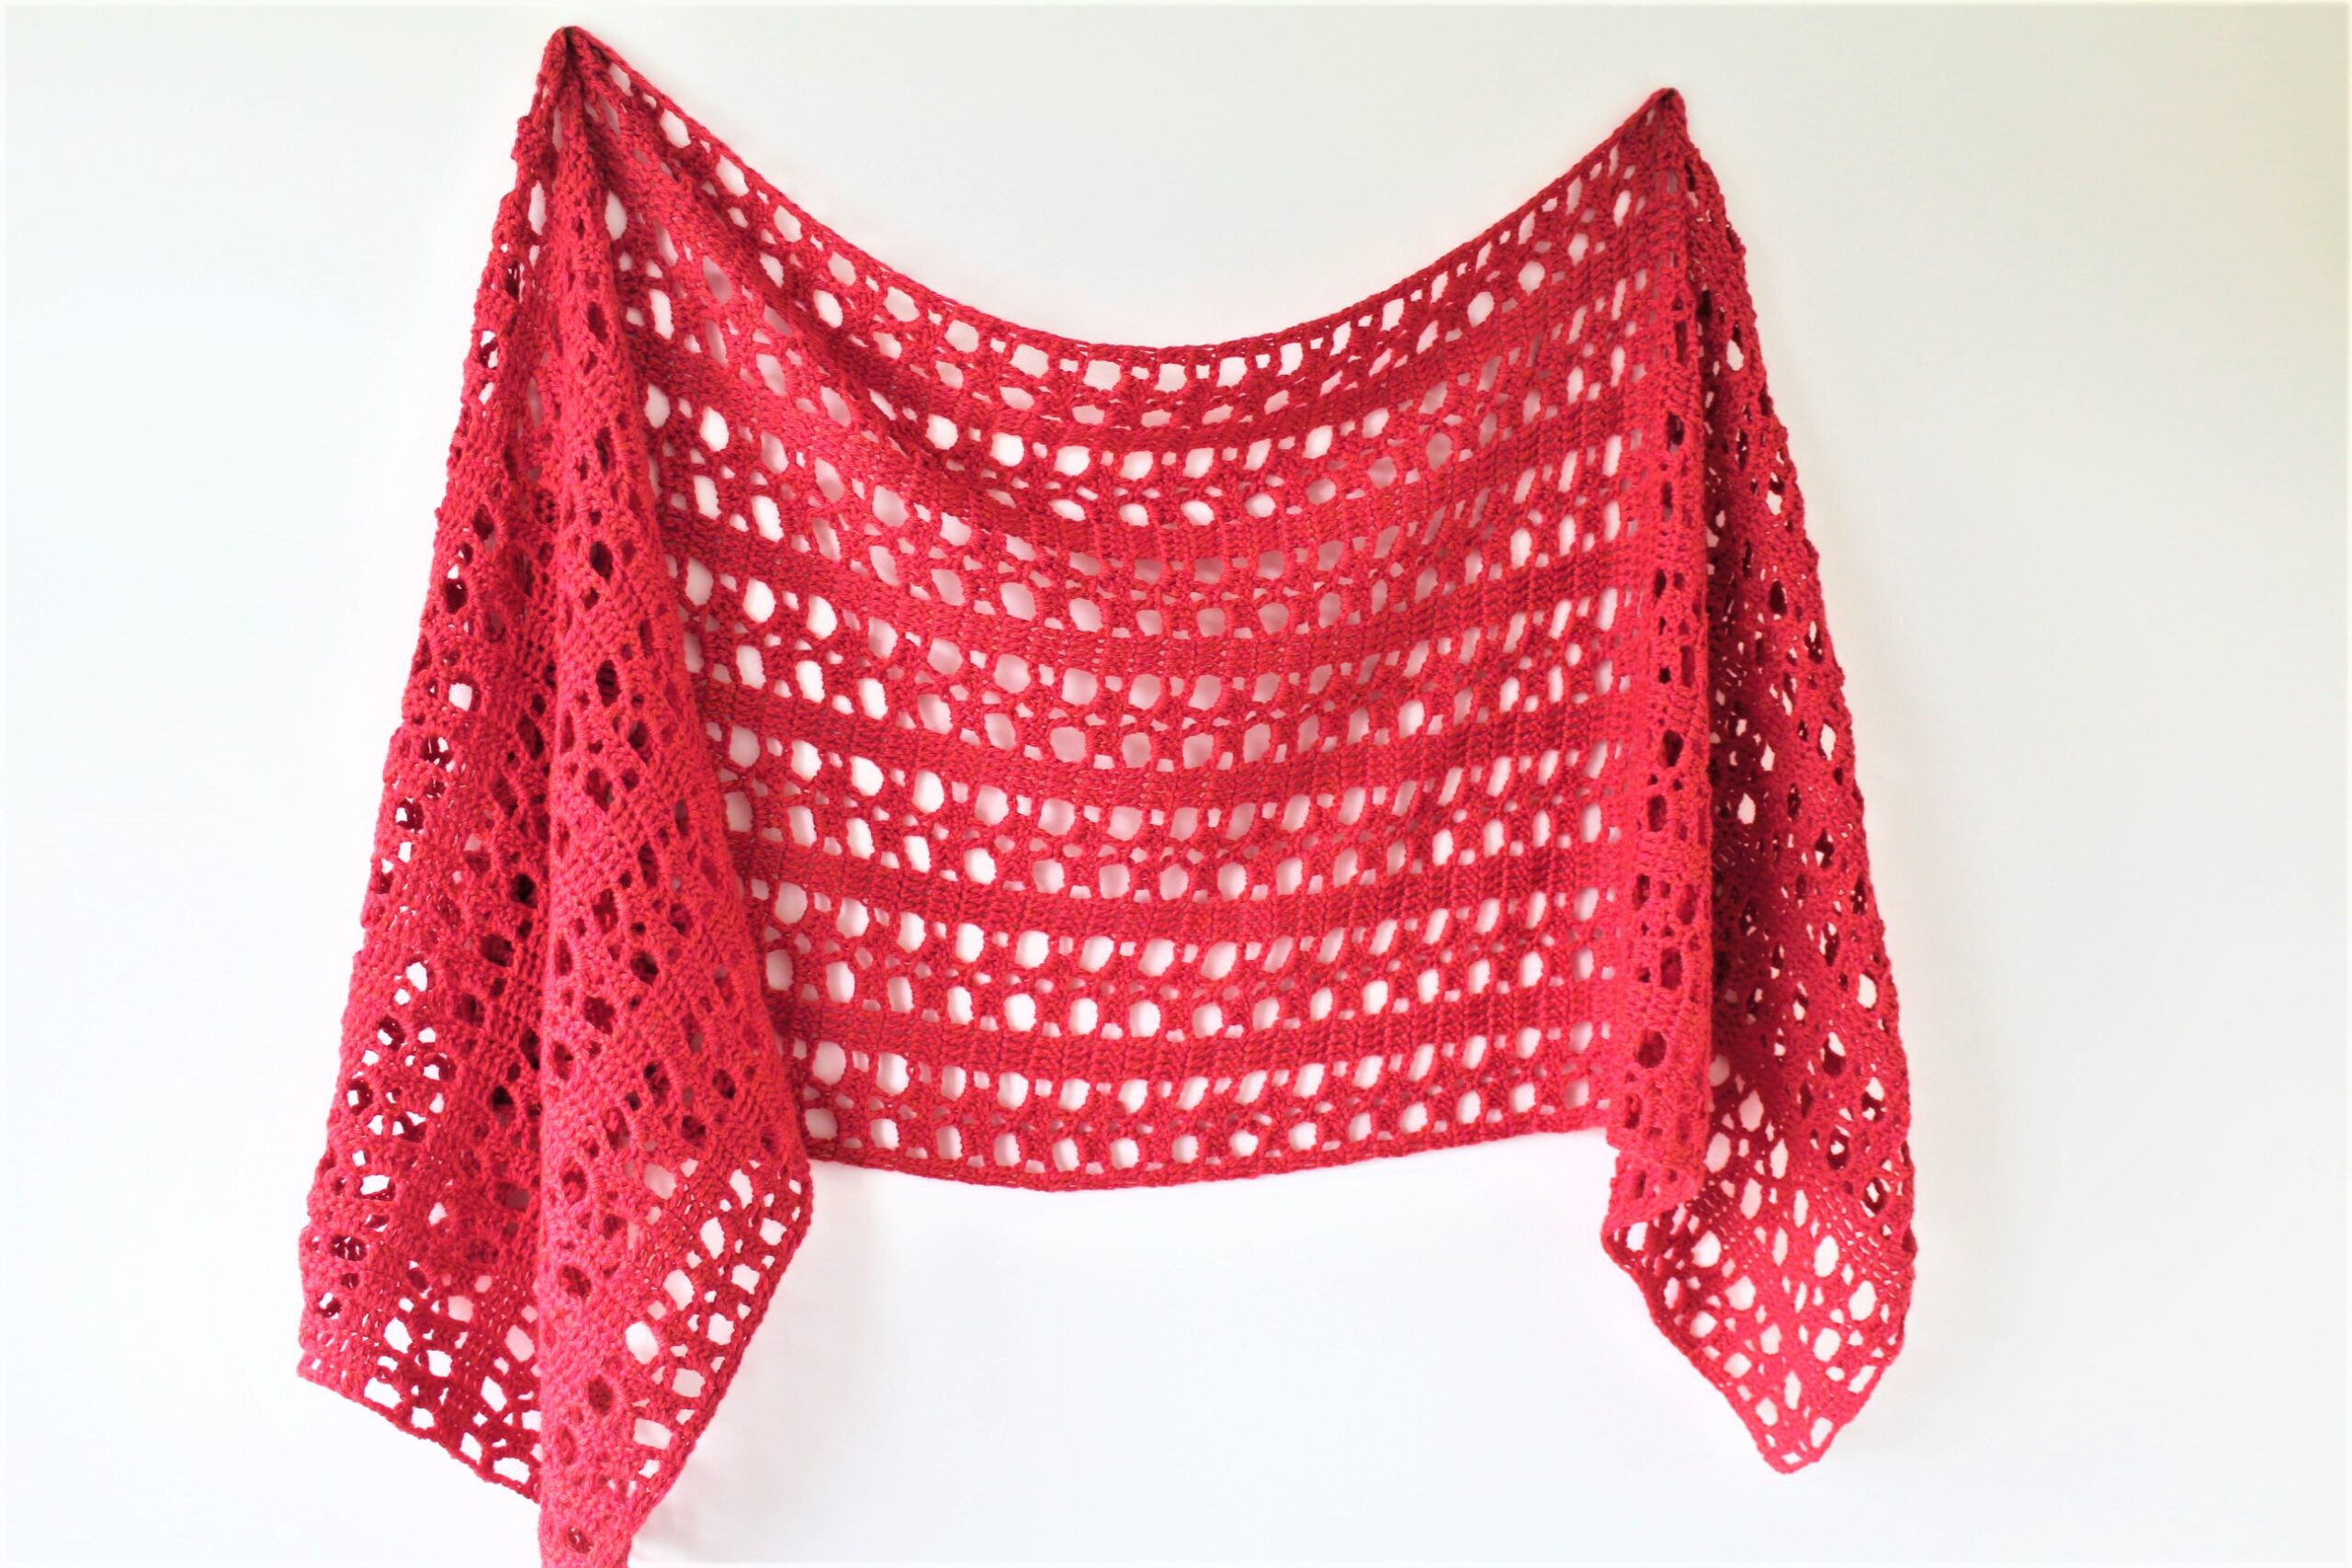 Different angle of the Lucia Sideways Shawl